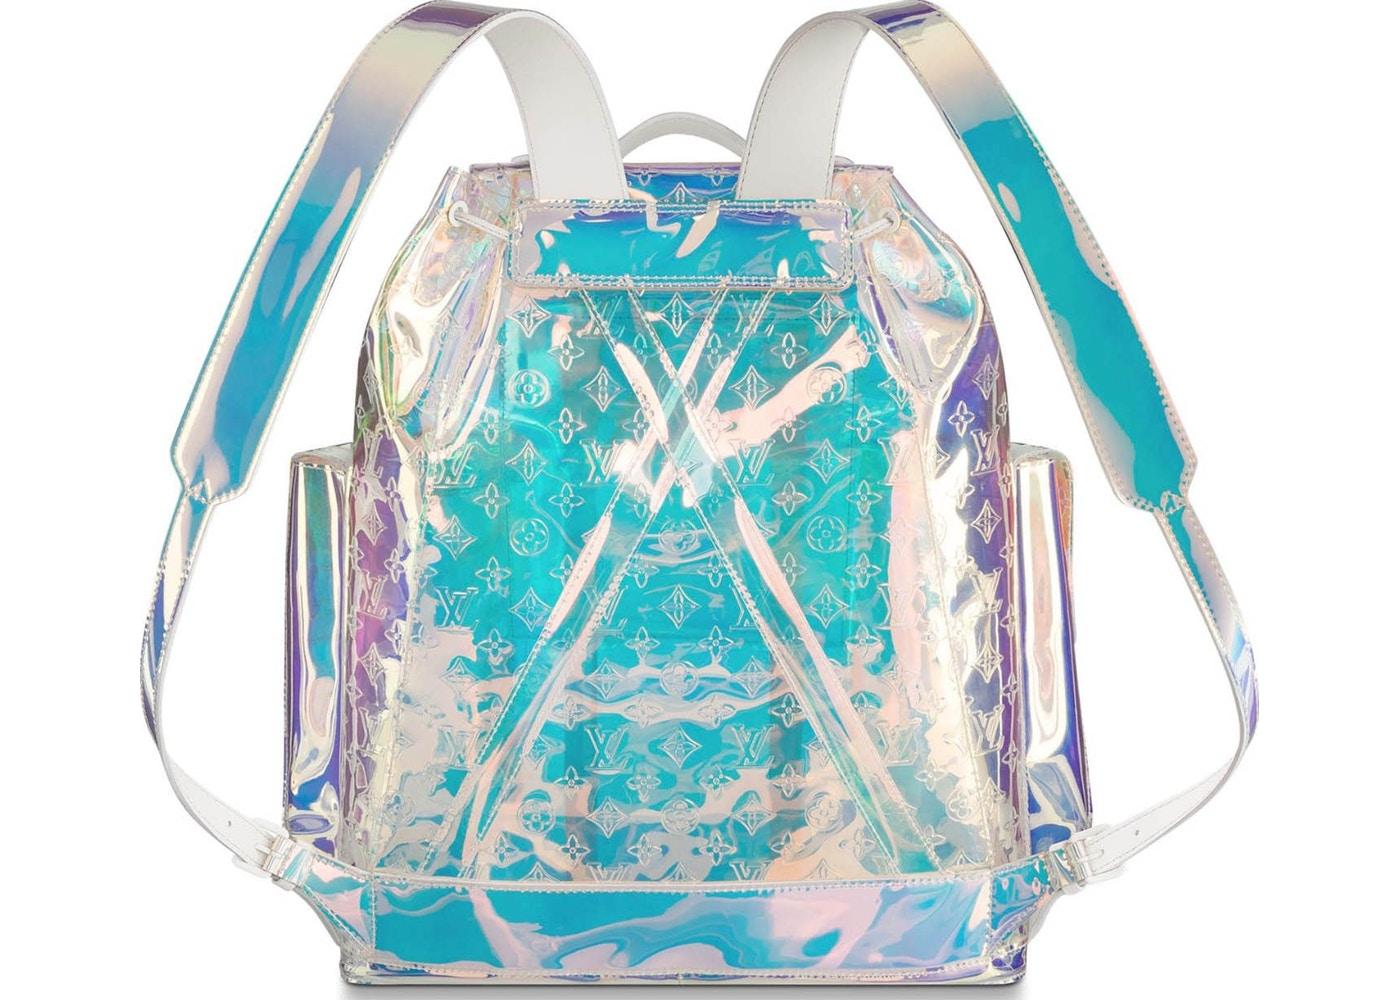 Louis Vuitton Christopher GM Prism Iridescent Backpack Limited Edition 2019 
100% Authentic guaranteed and  Original receipt available upon request to a buyer with all personal info covered.
NEW with tags ,dust bag,store fresh.


FINAL SALE.